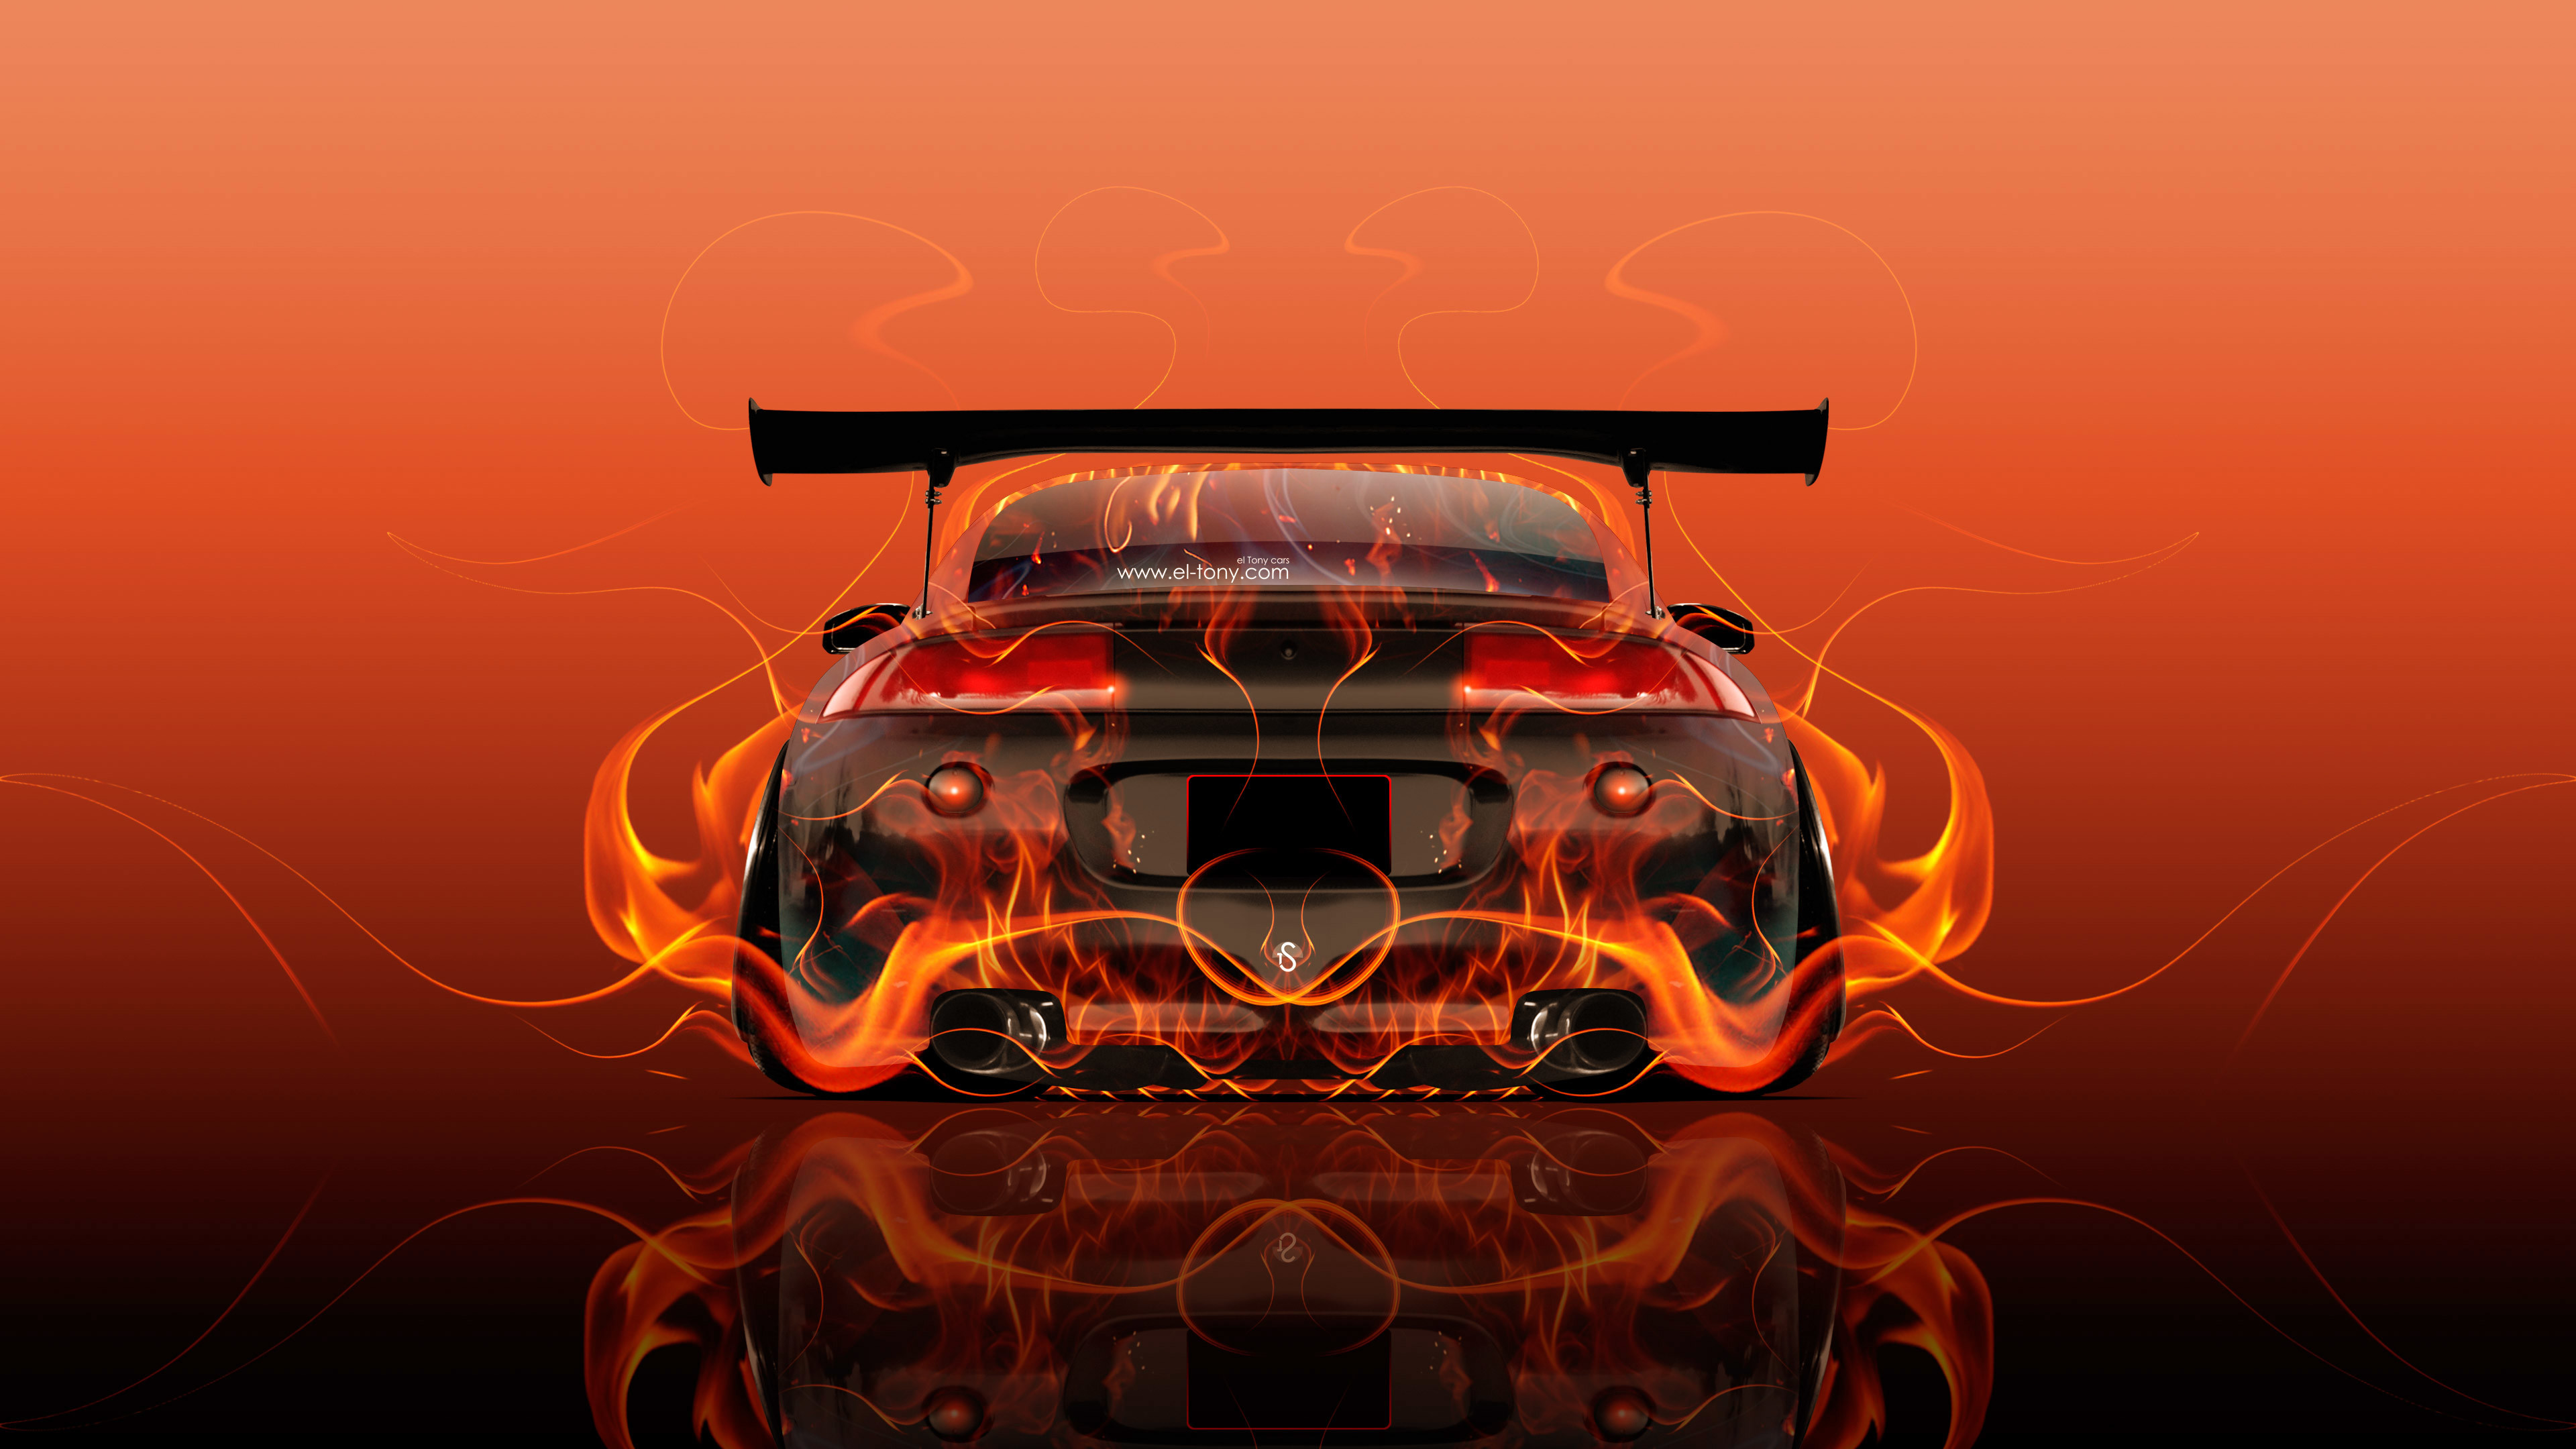 3840x2160 Mitsubishi-Eclipse-JDM-Tuning-Back-Fire-Abstract-Car-